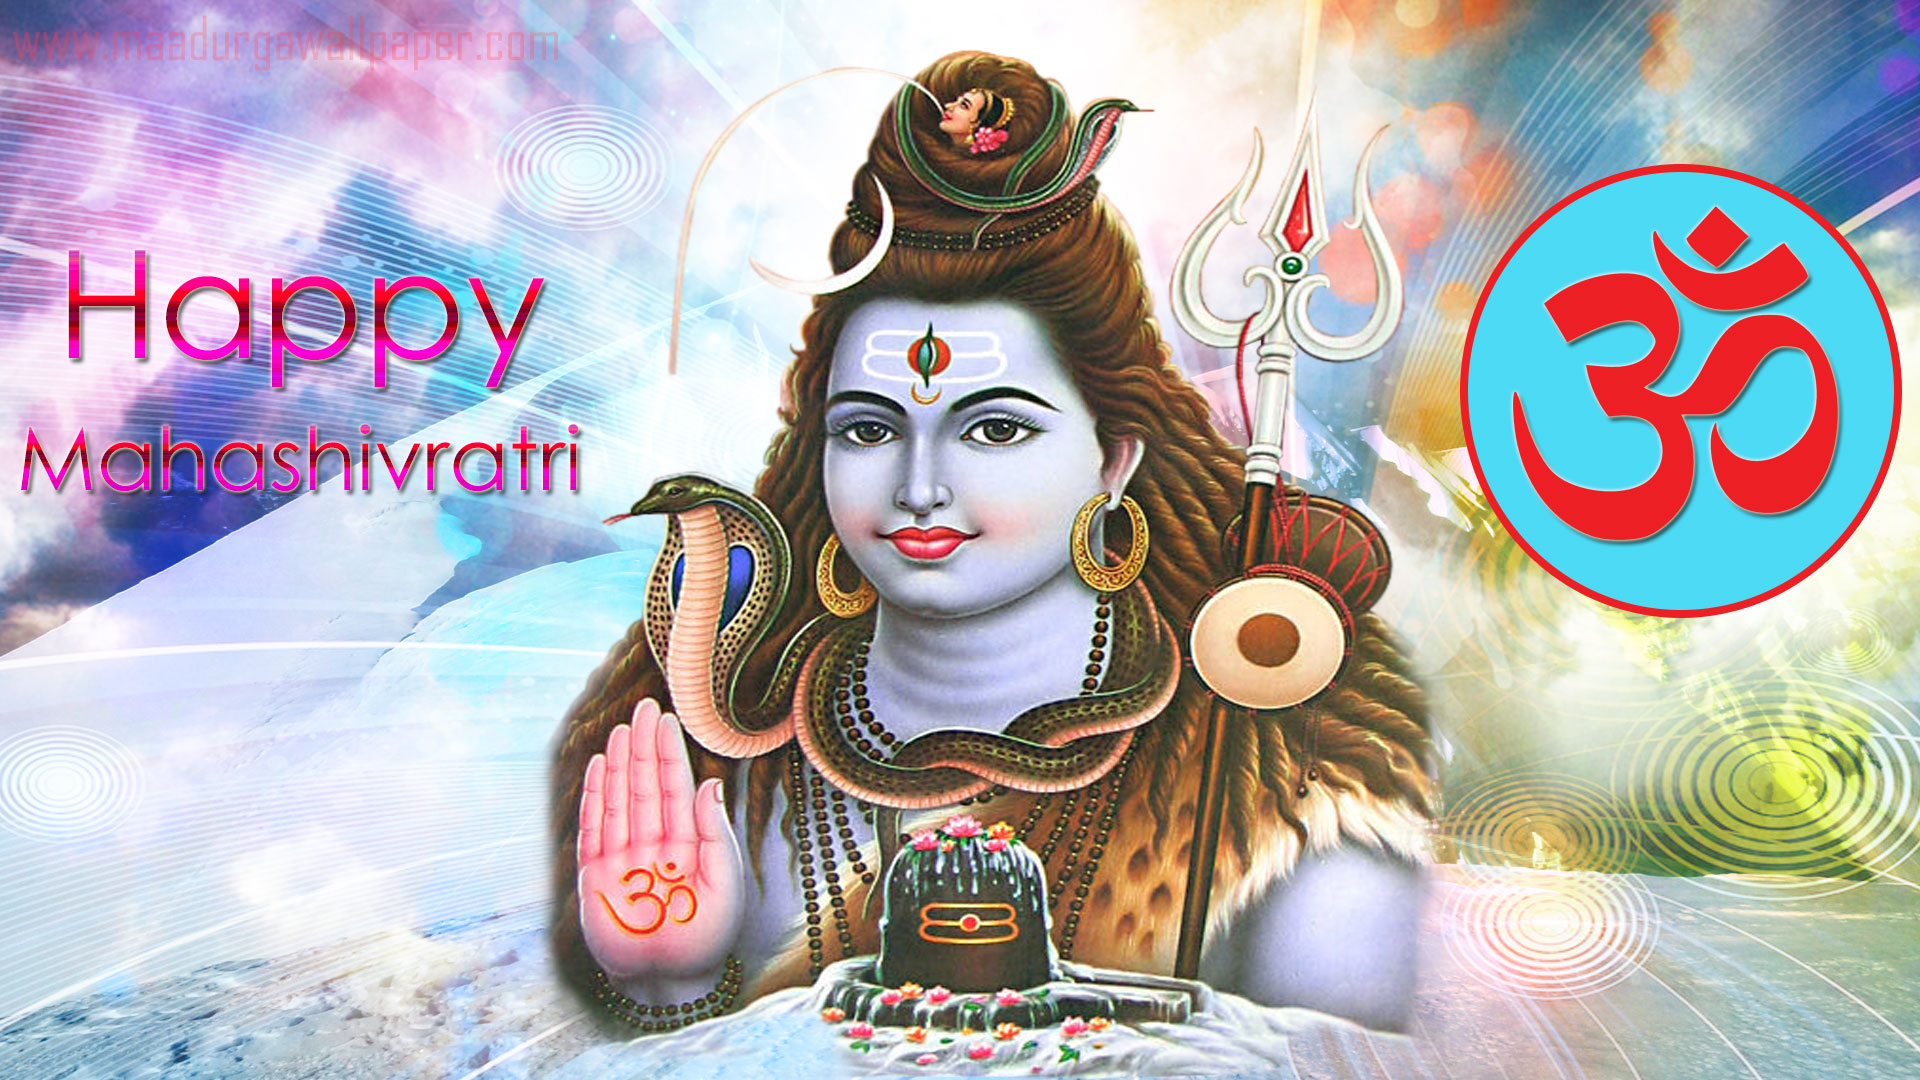 Lord Shiva Wallpapers, best images of God Shiva